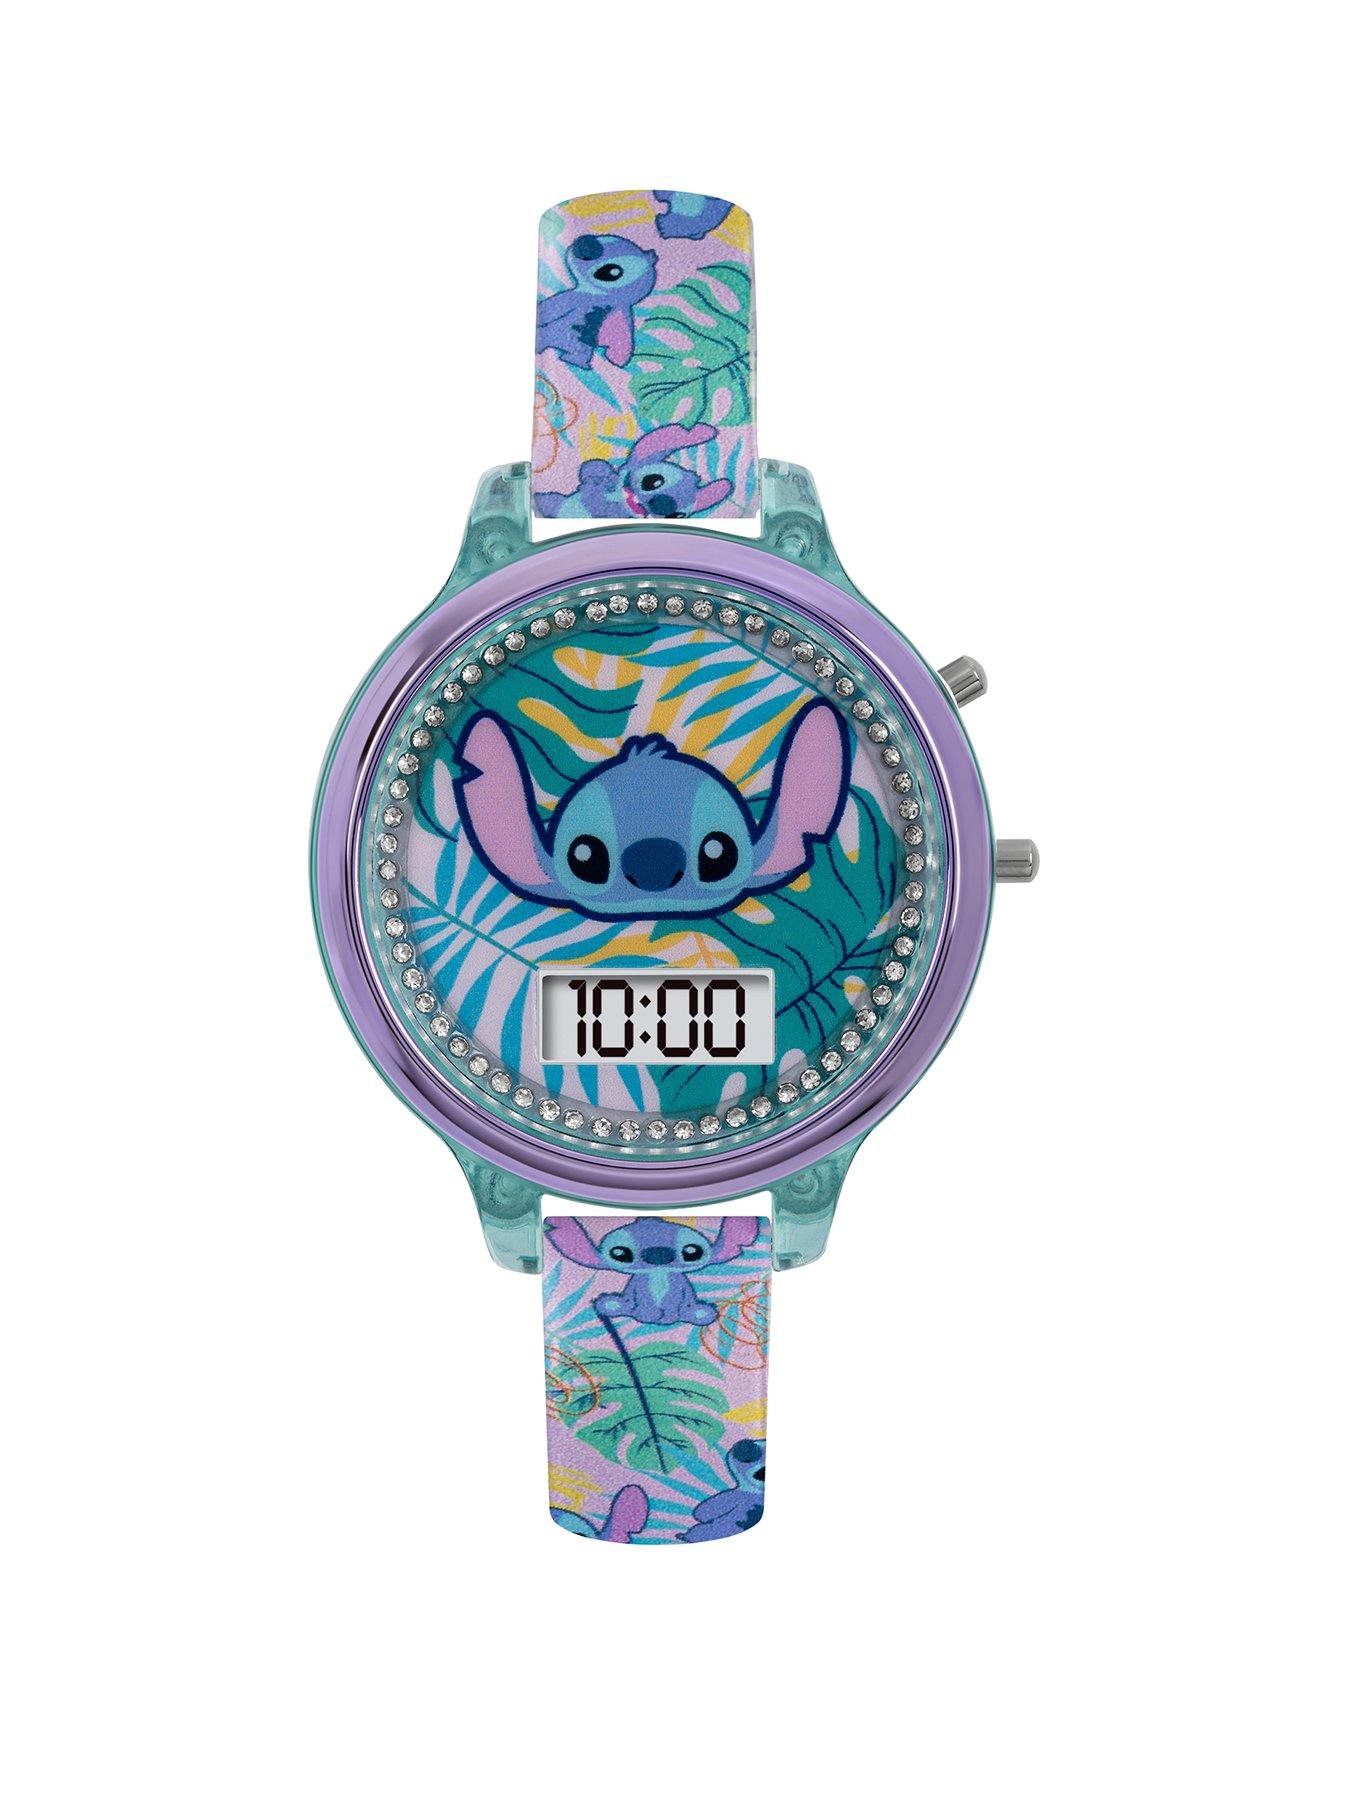 Happy Birthday Lilo and Stitch Diamond Painting Kits for Adults 20